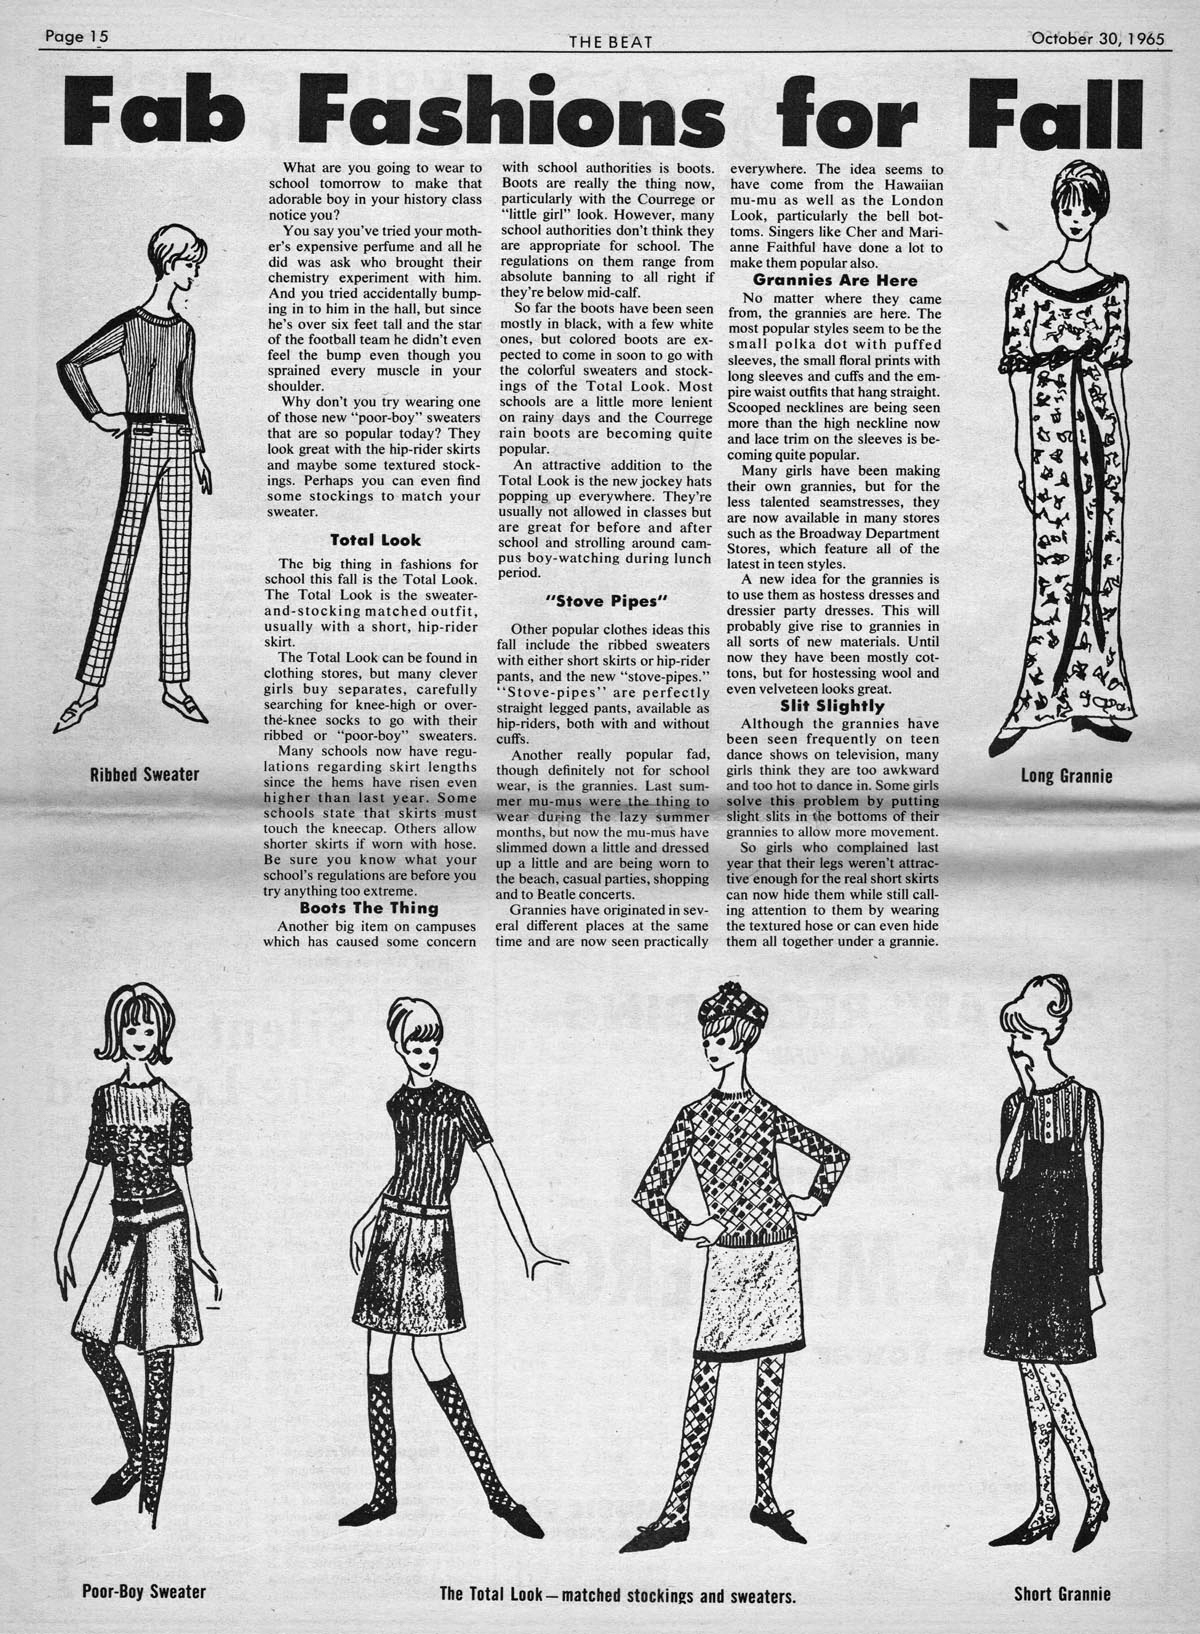 several fashions, including skirts and pants